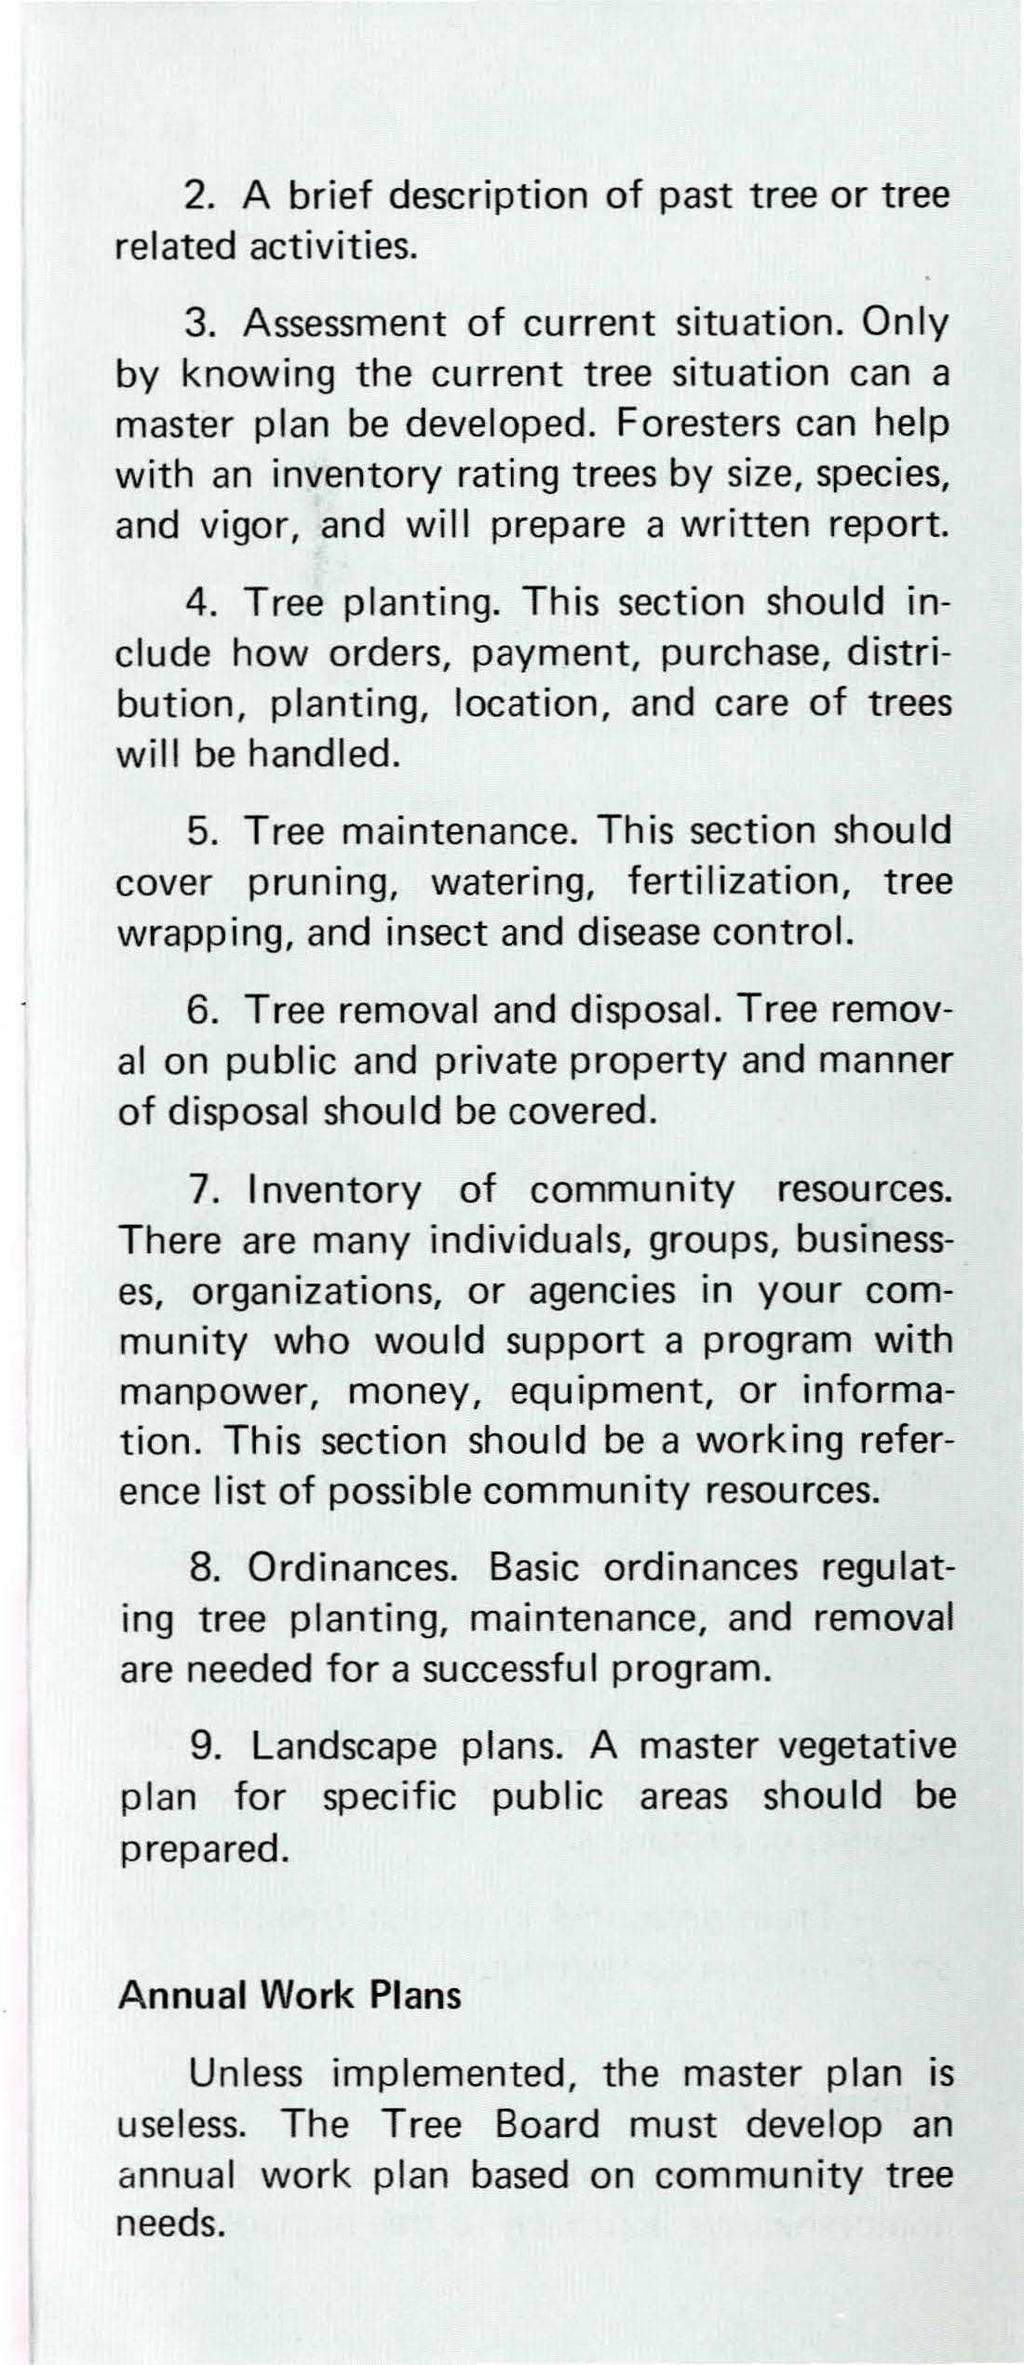 2. A brief description of past tree or tree related activities. 3. Assessment of current situation. Only by knowing the current tree situation can a master plan be developed.